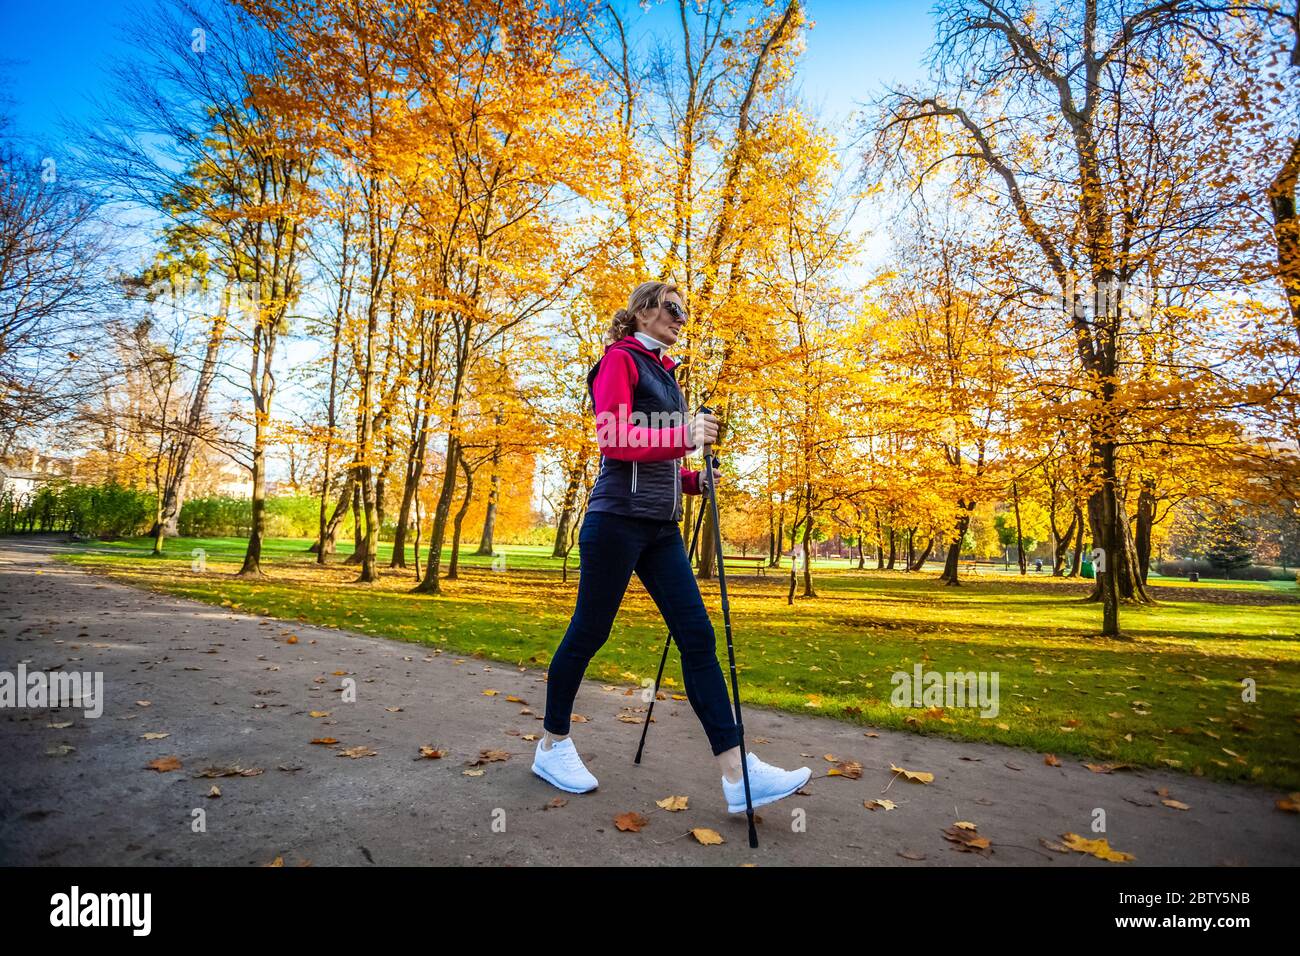 Nordic walking - middle-age woman working out in city park Stock Photo